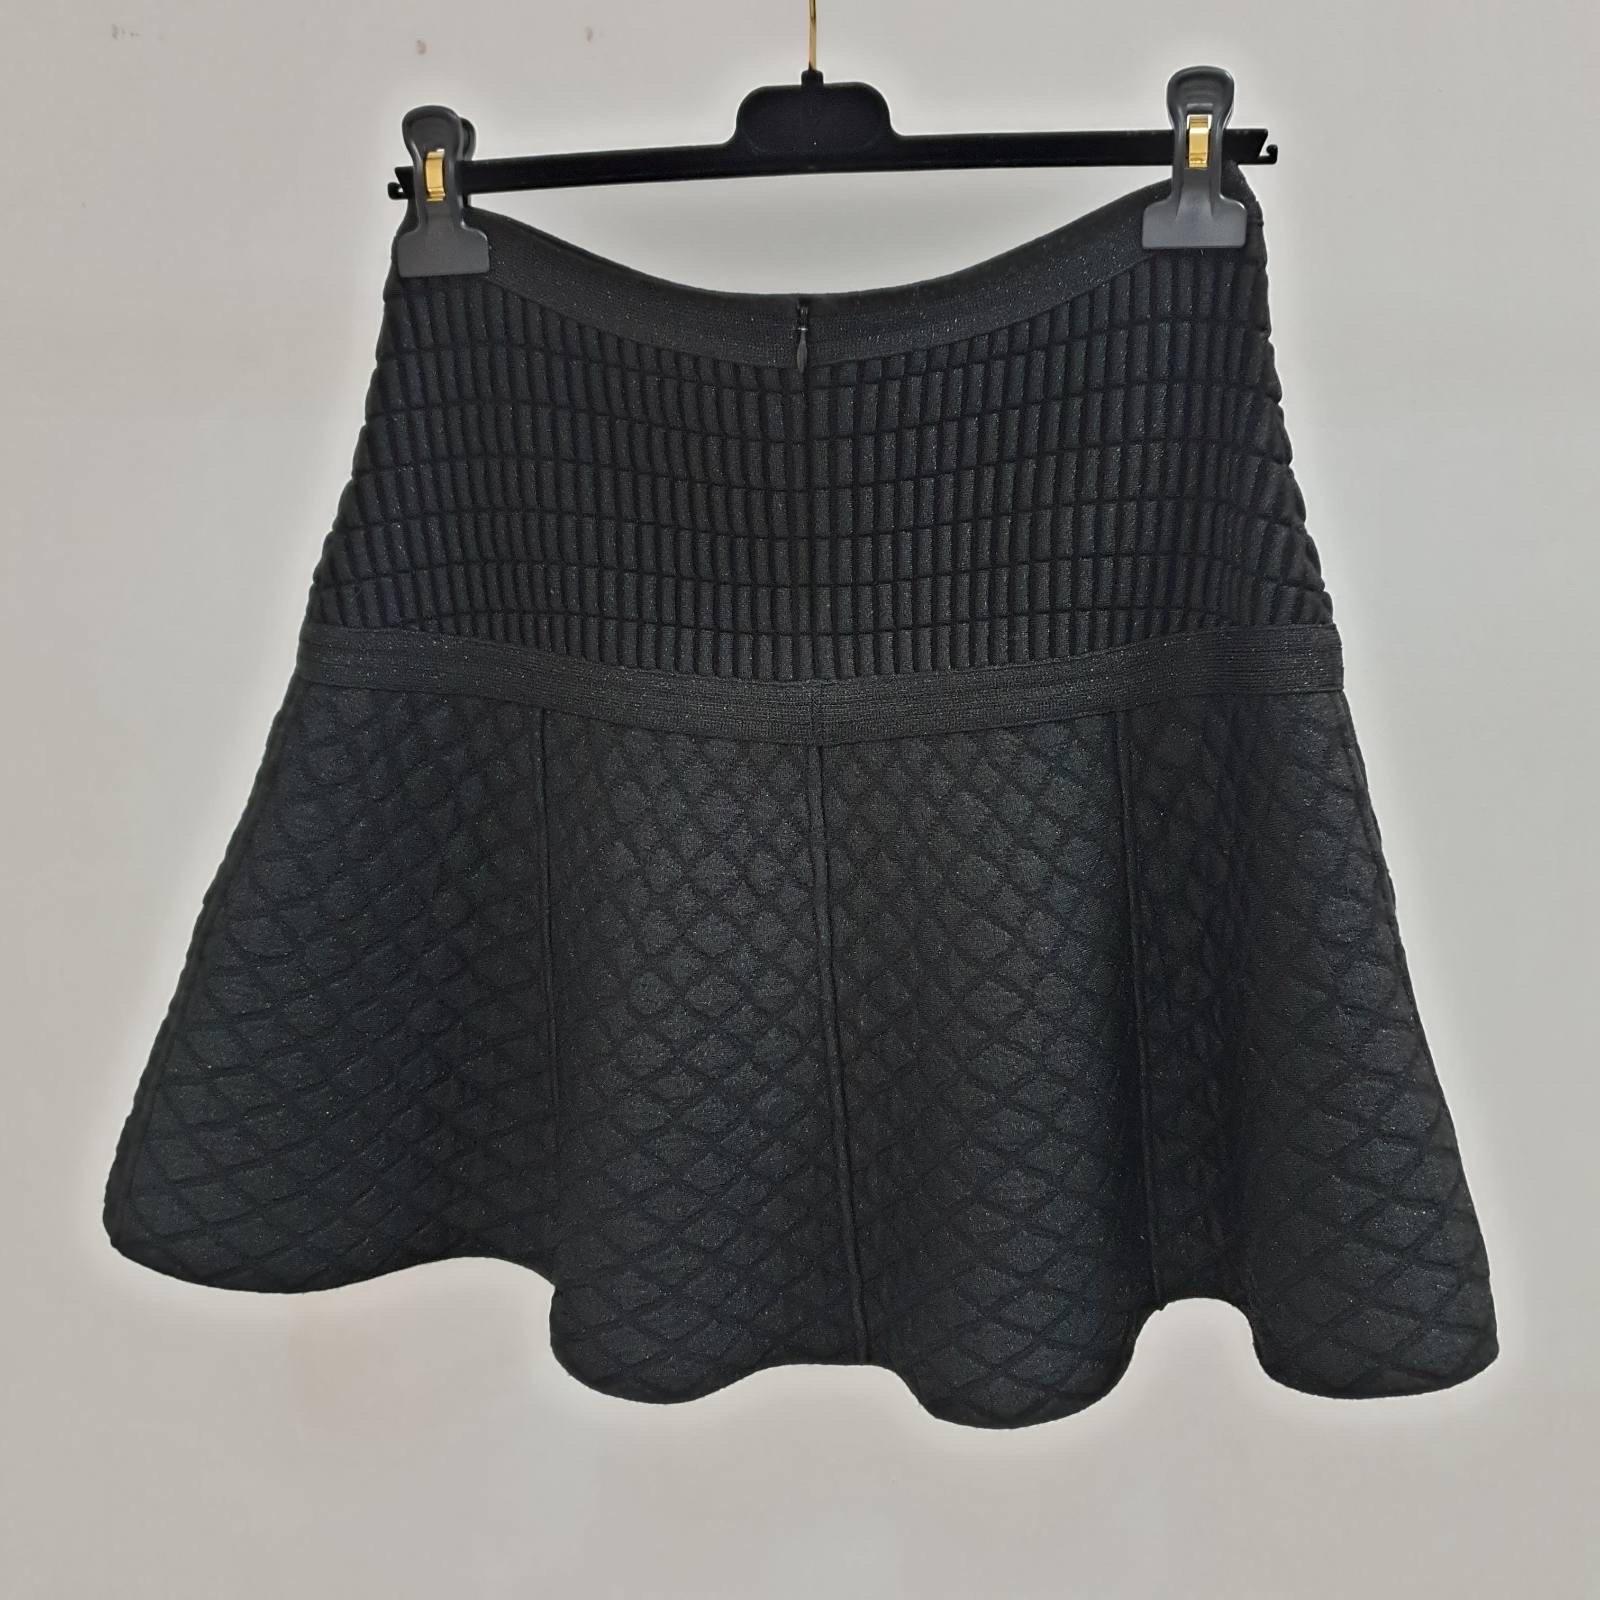 
From Globalization collection.
Chanel short black skirt skater featuring a center back zip, front pockets with decorative buttons, a fancy mix wool and polypropylene textured fabric.

 Sz.36
Very good condition